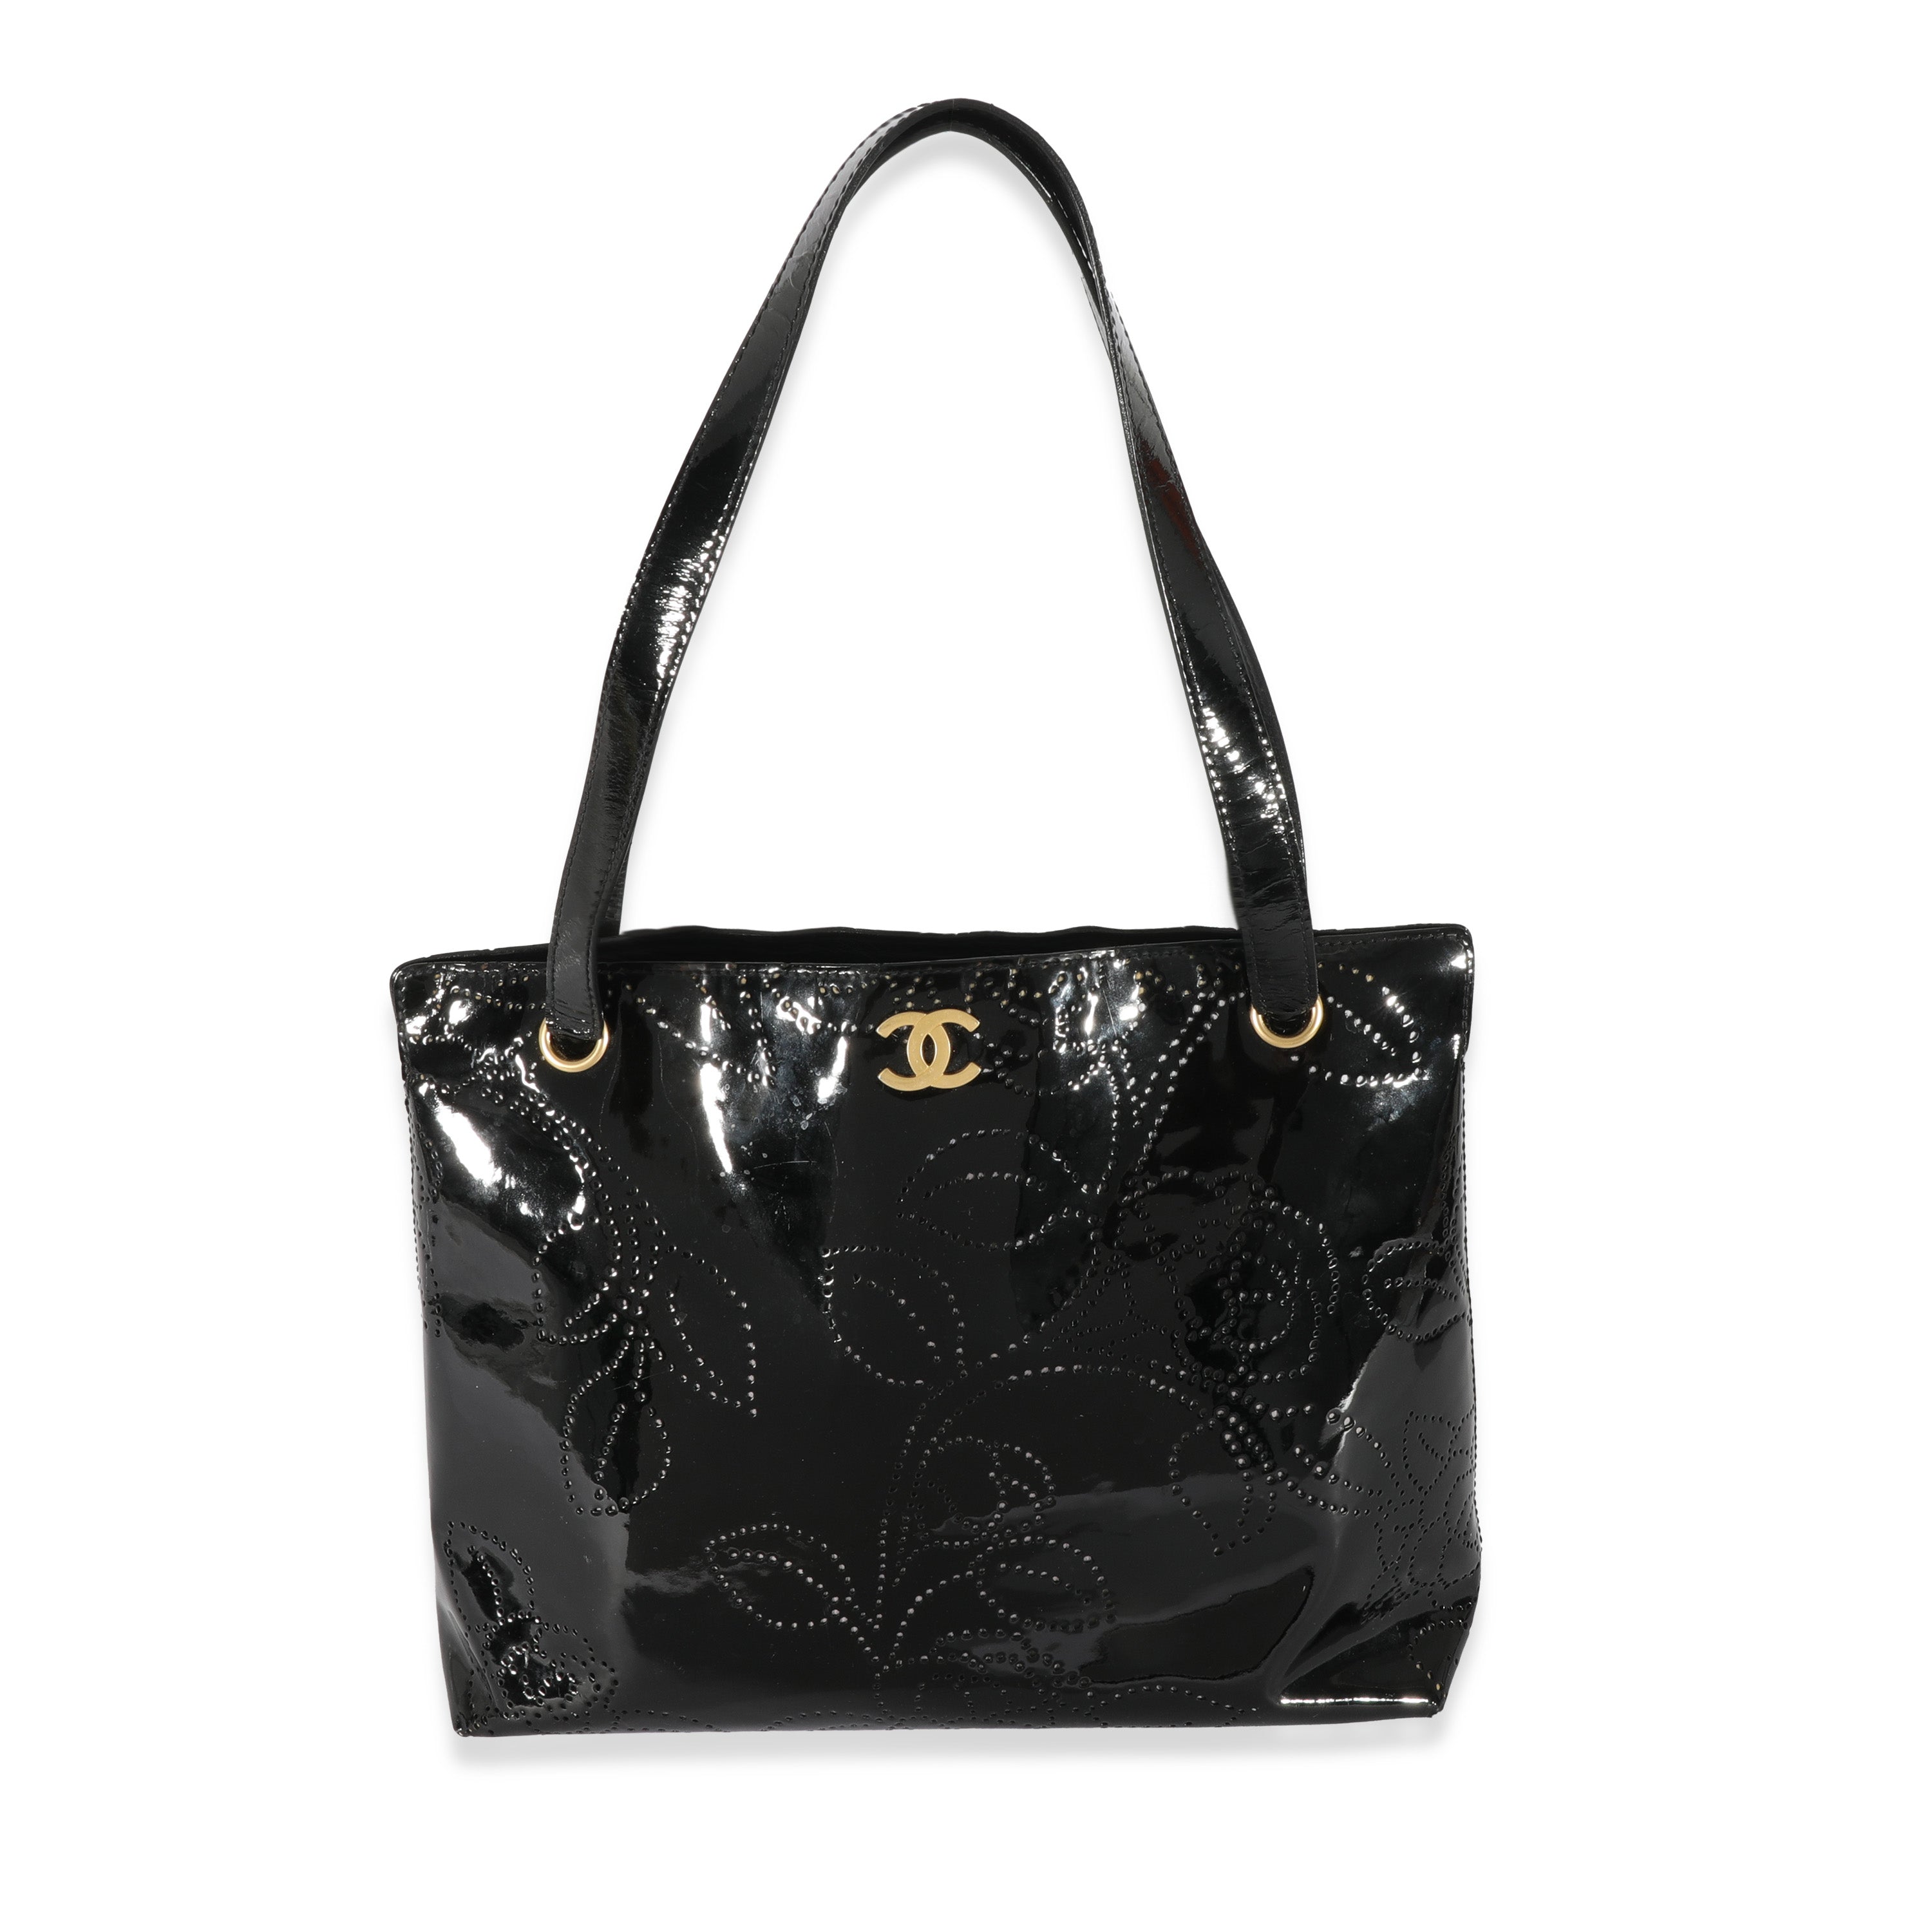 Chanel Black Patent Perforated Camellia Tote, myGemma, NZ